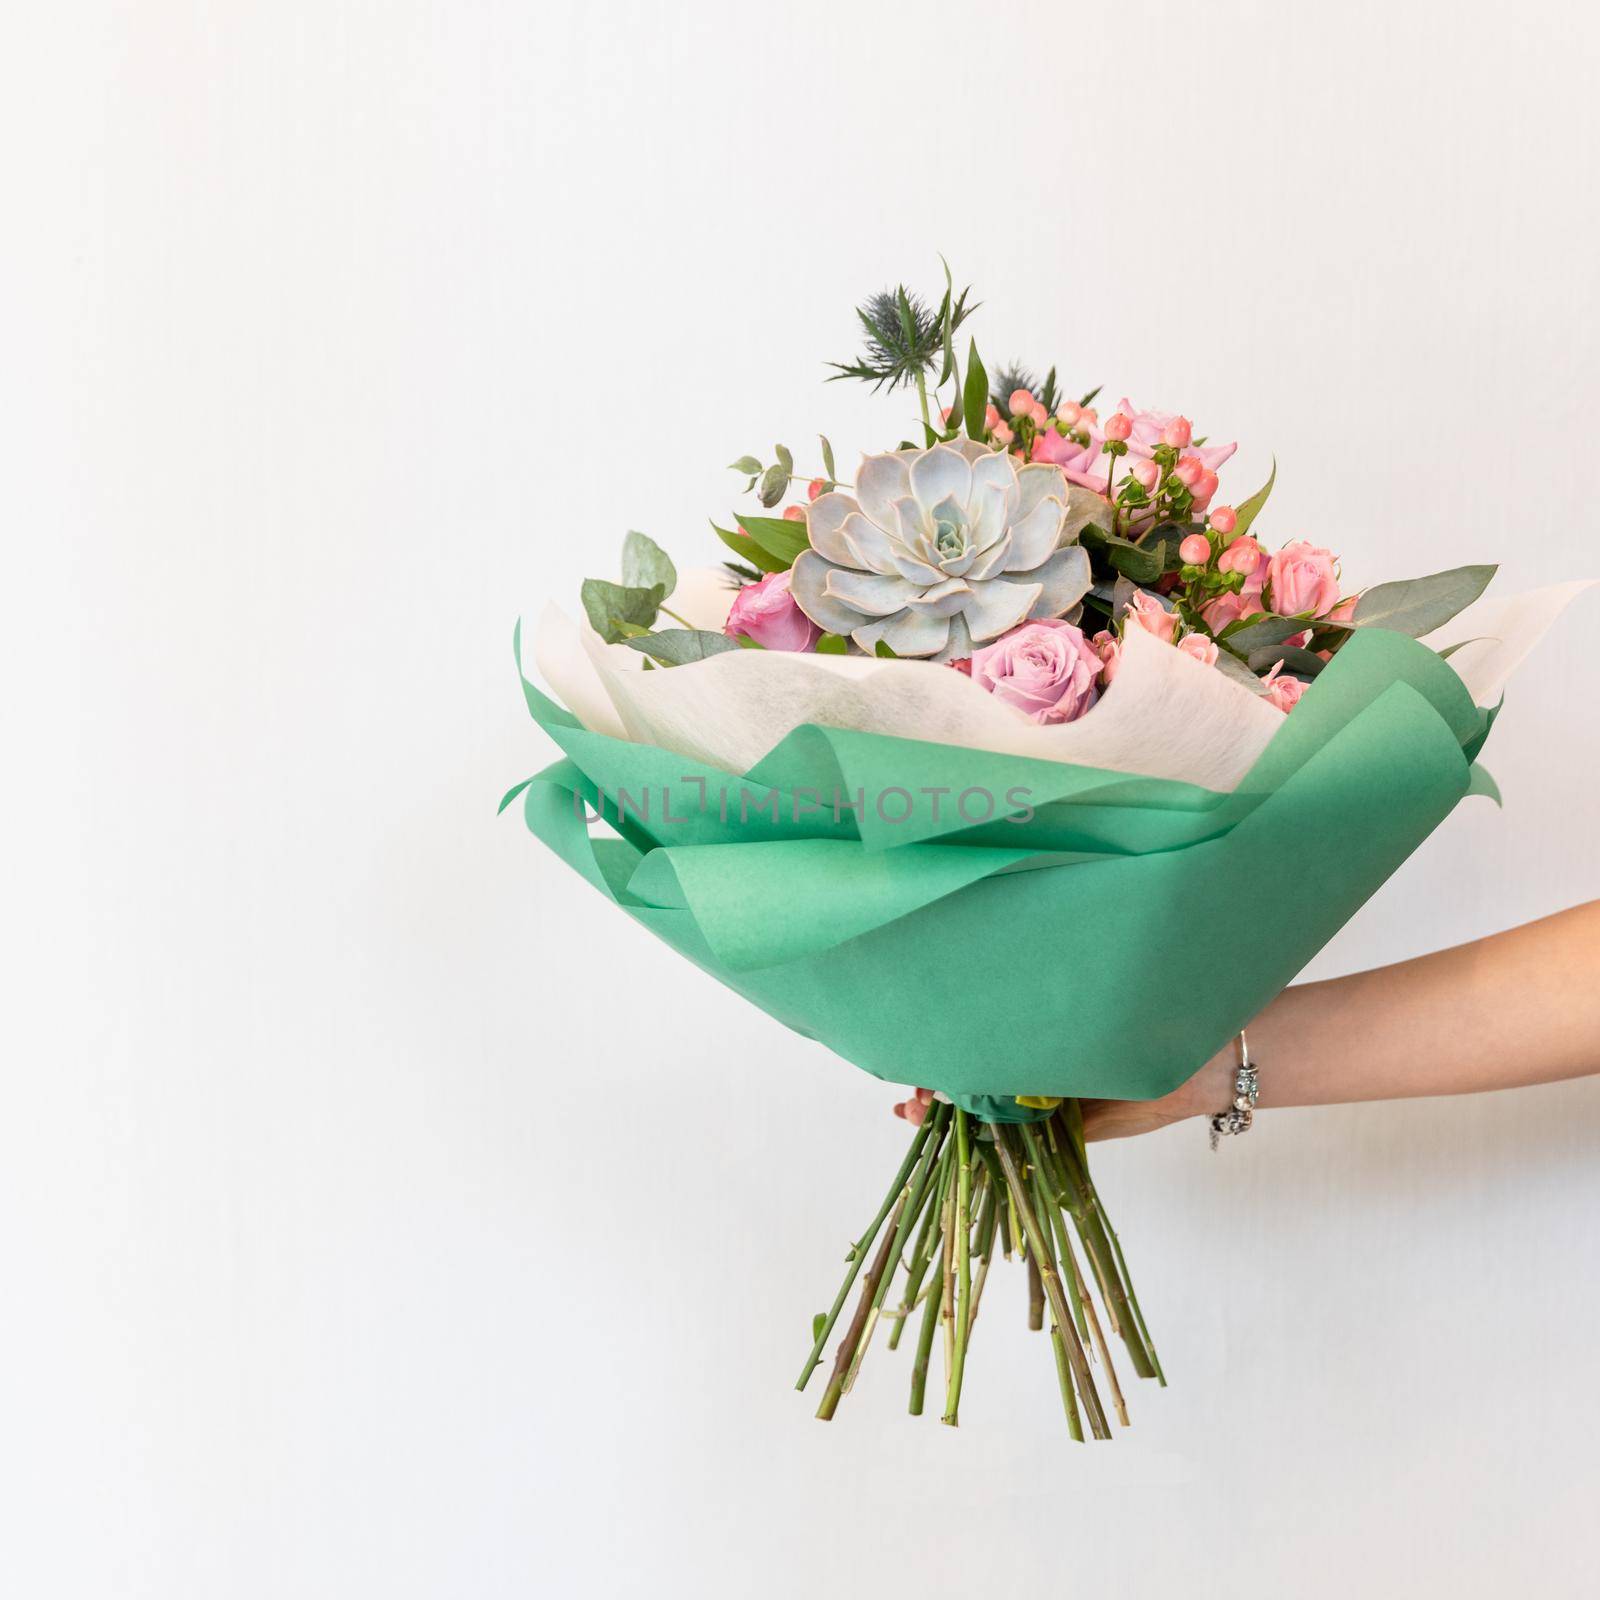 Woman holding colorful flower bouquet with white background